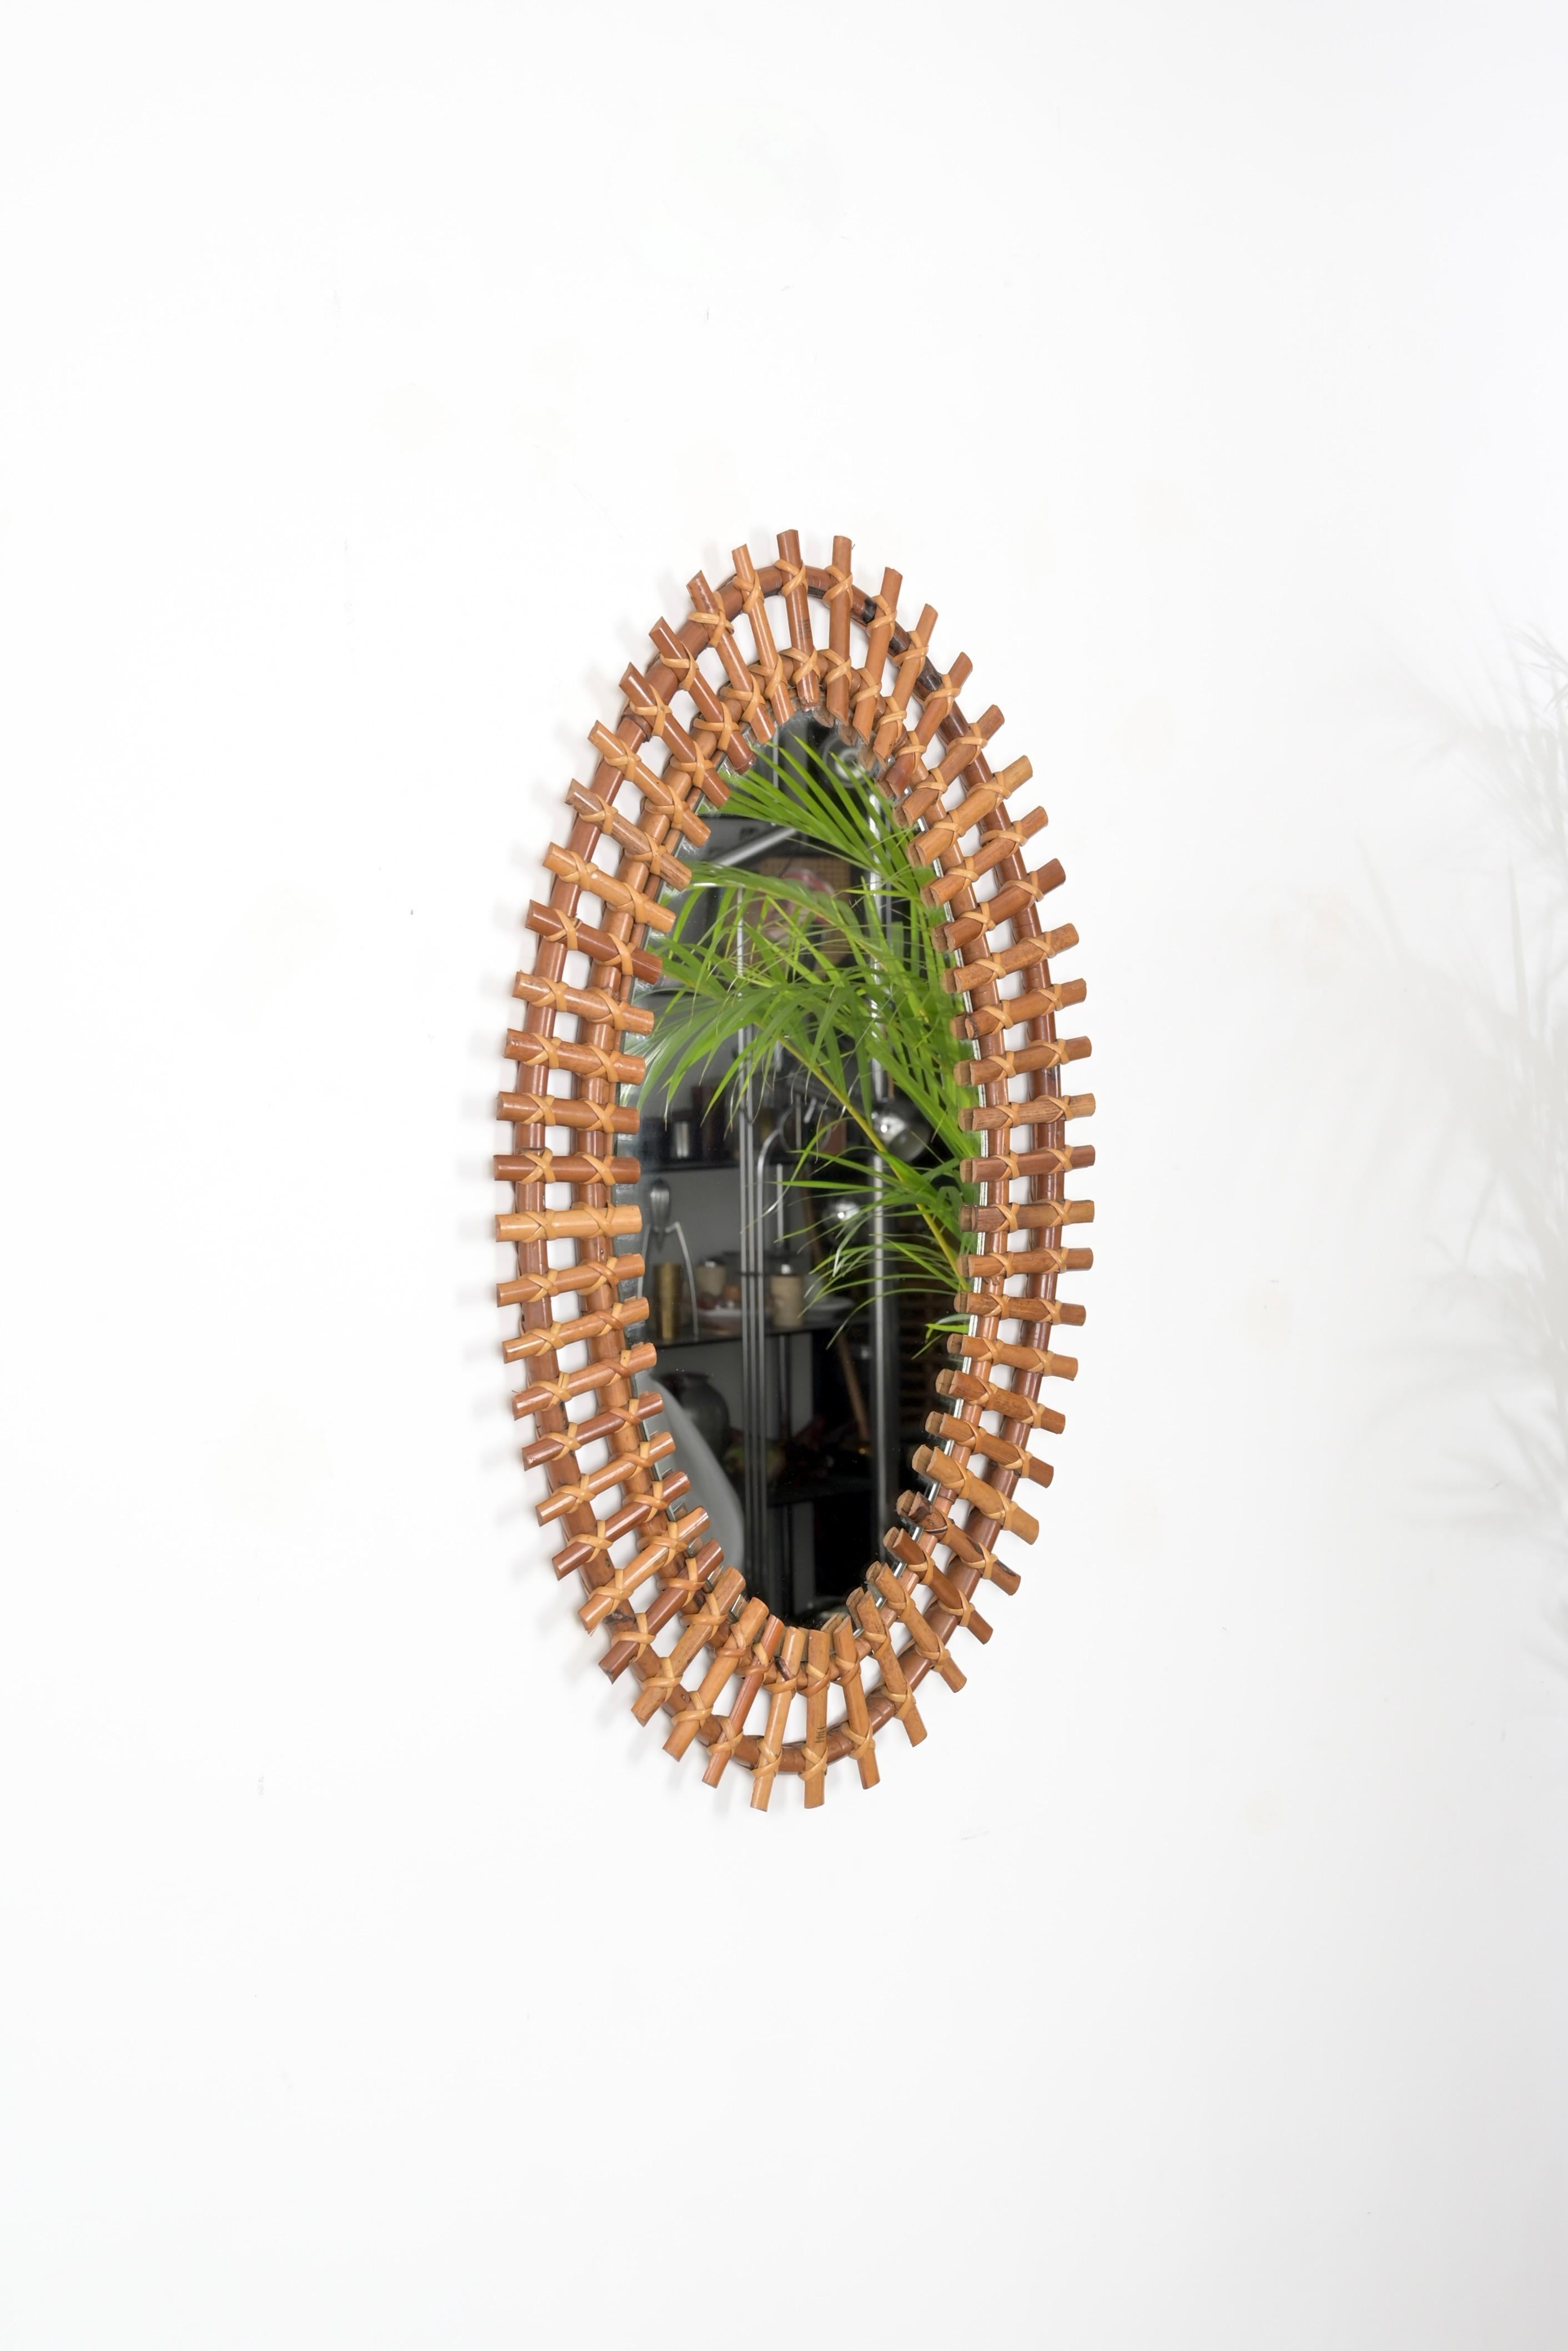 Mid-Century Modern Midcentury French Riviera Oval Mirror in Rattan Wicker and Bamboo, Italy 1960s For Sale